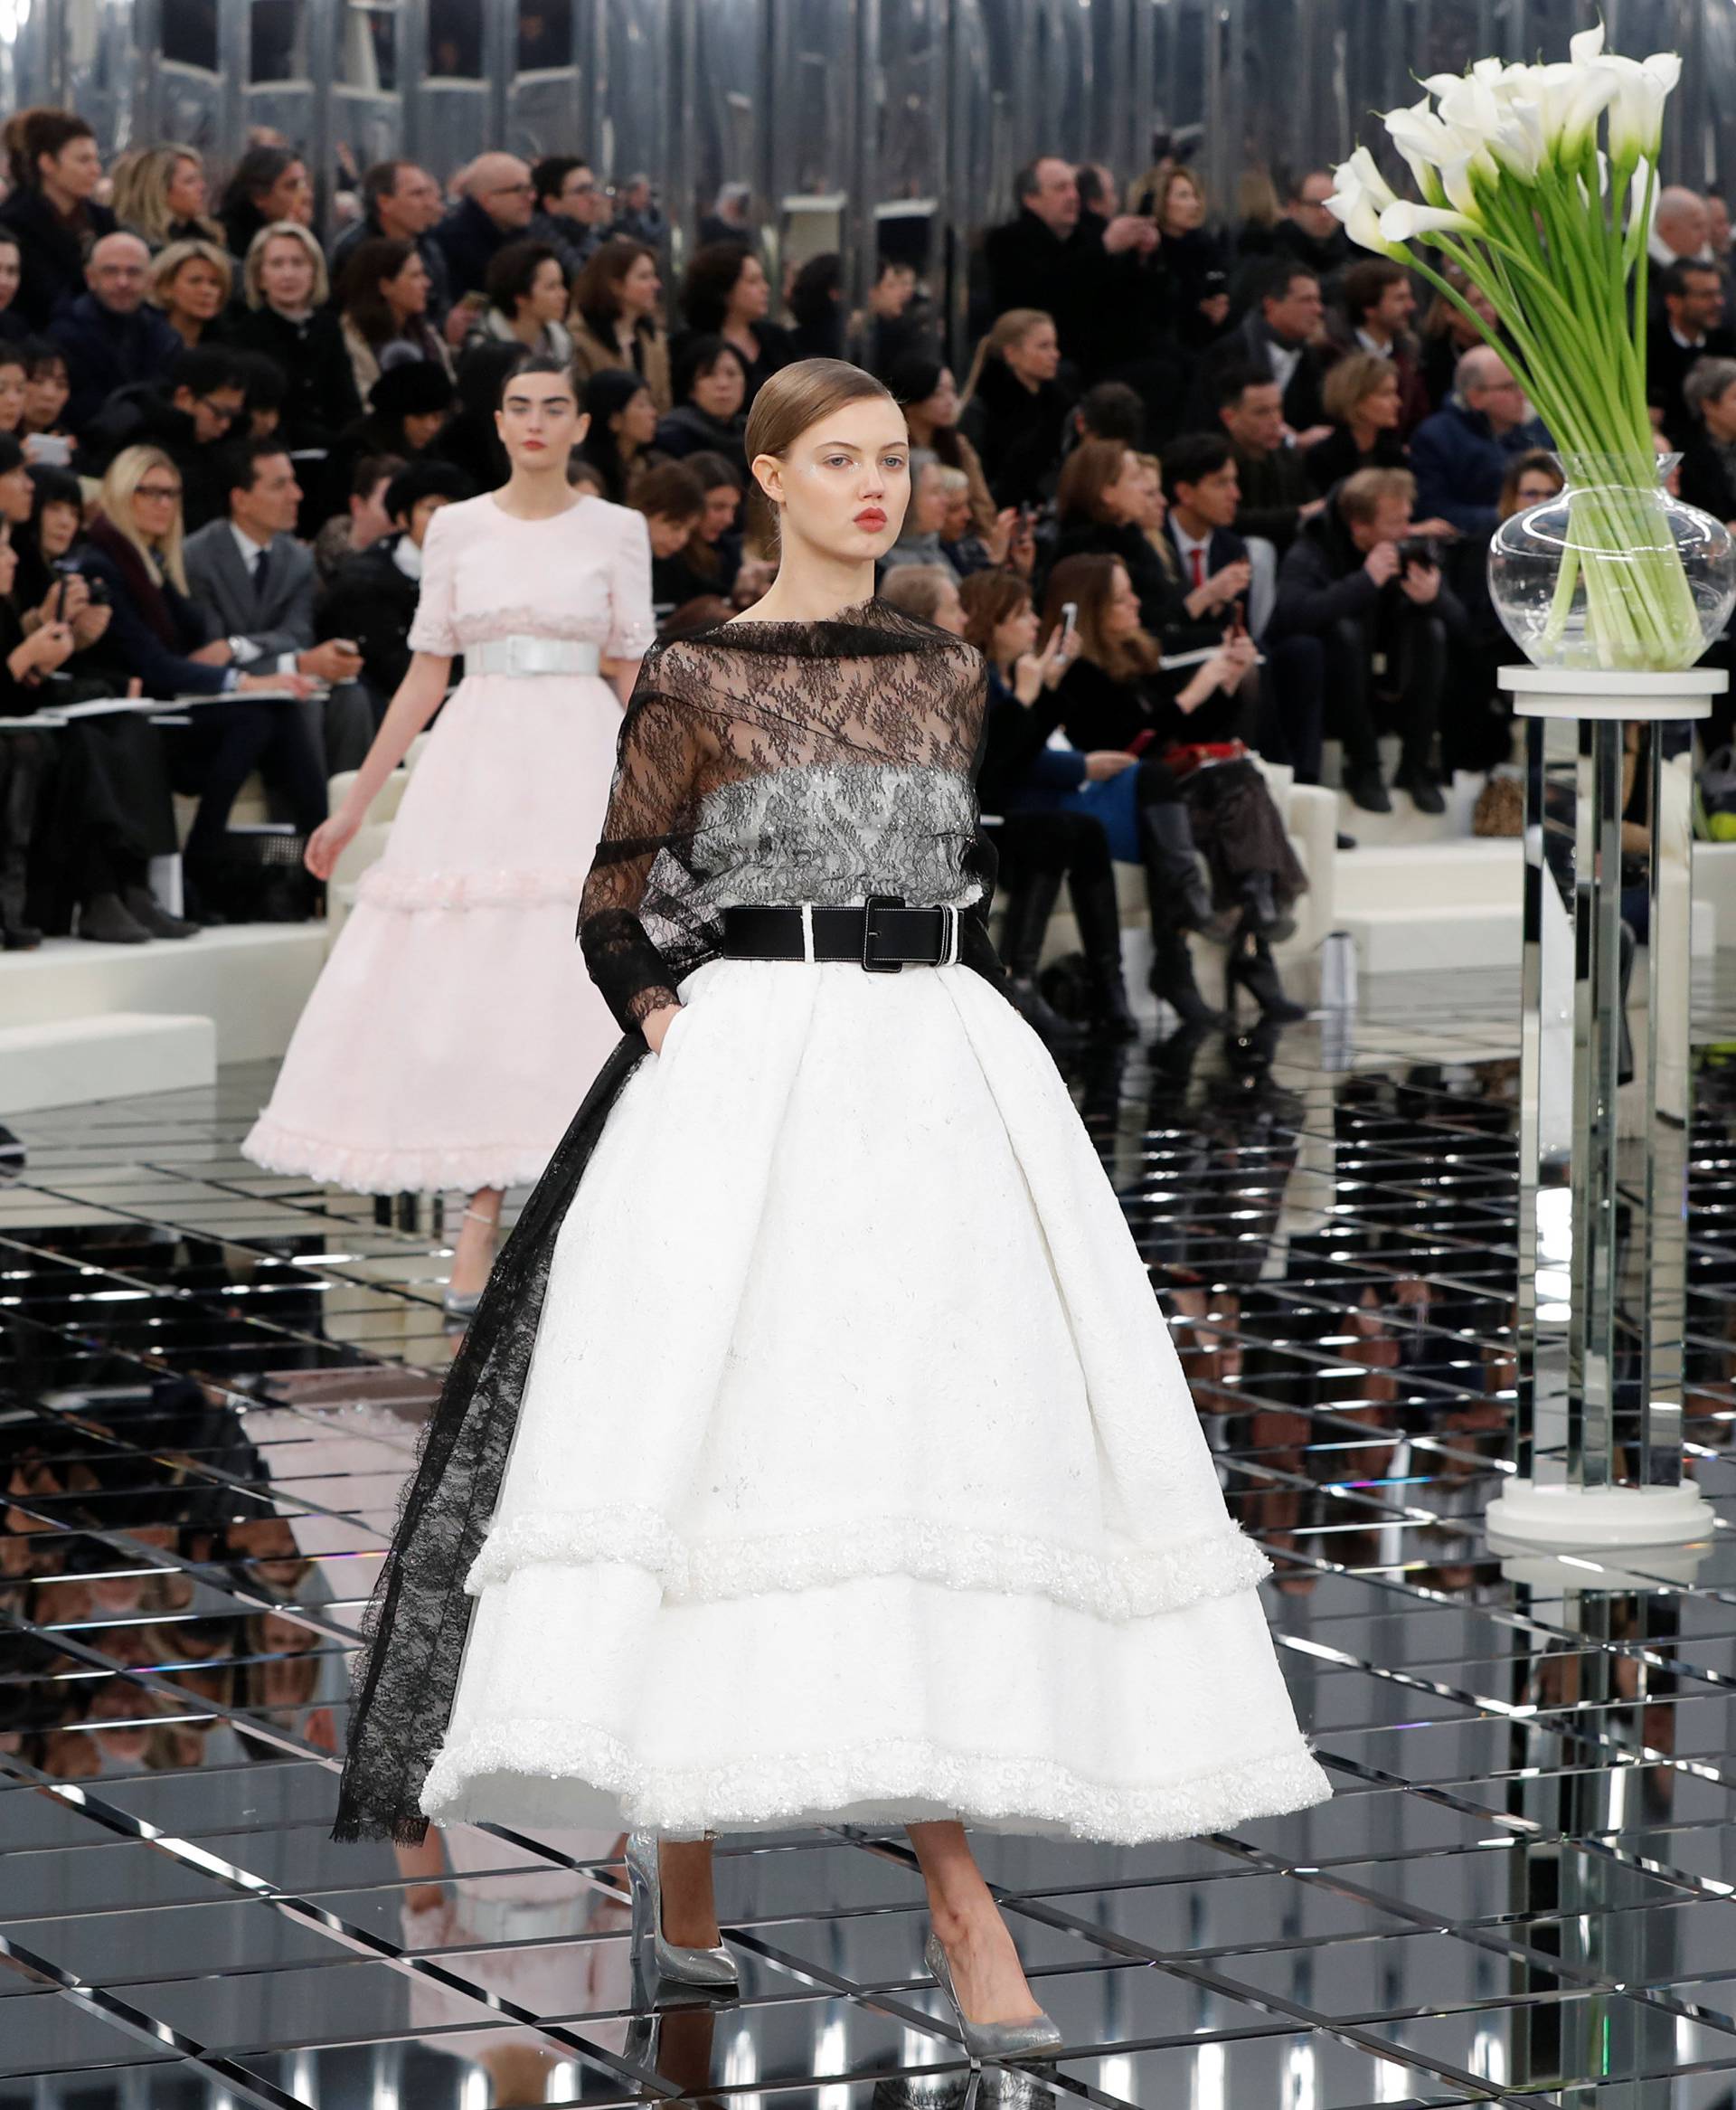 Model Lindsey Wixson presents a creation by German designer Karl Lagerfeld as part of his Haute Couture Spring/Summer 2017 fashion show for Chanel in Paris